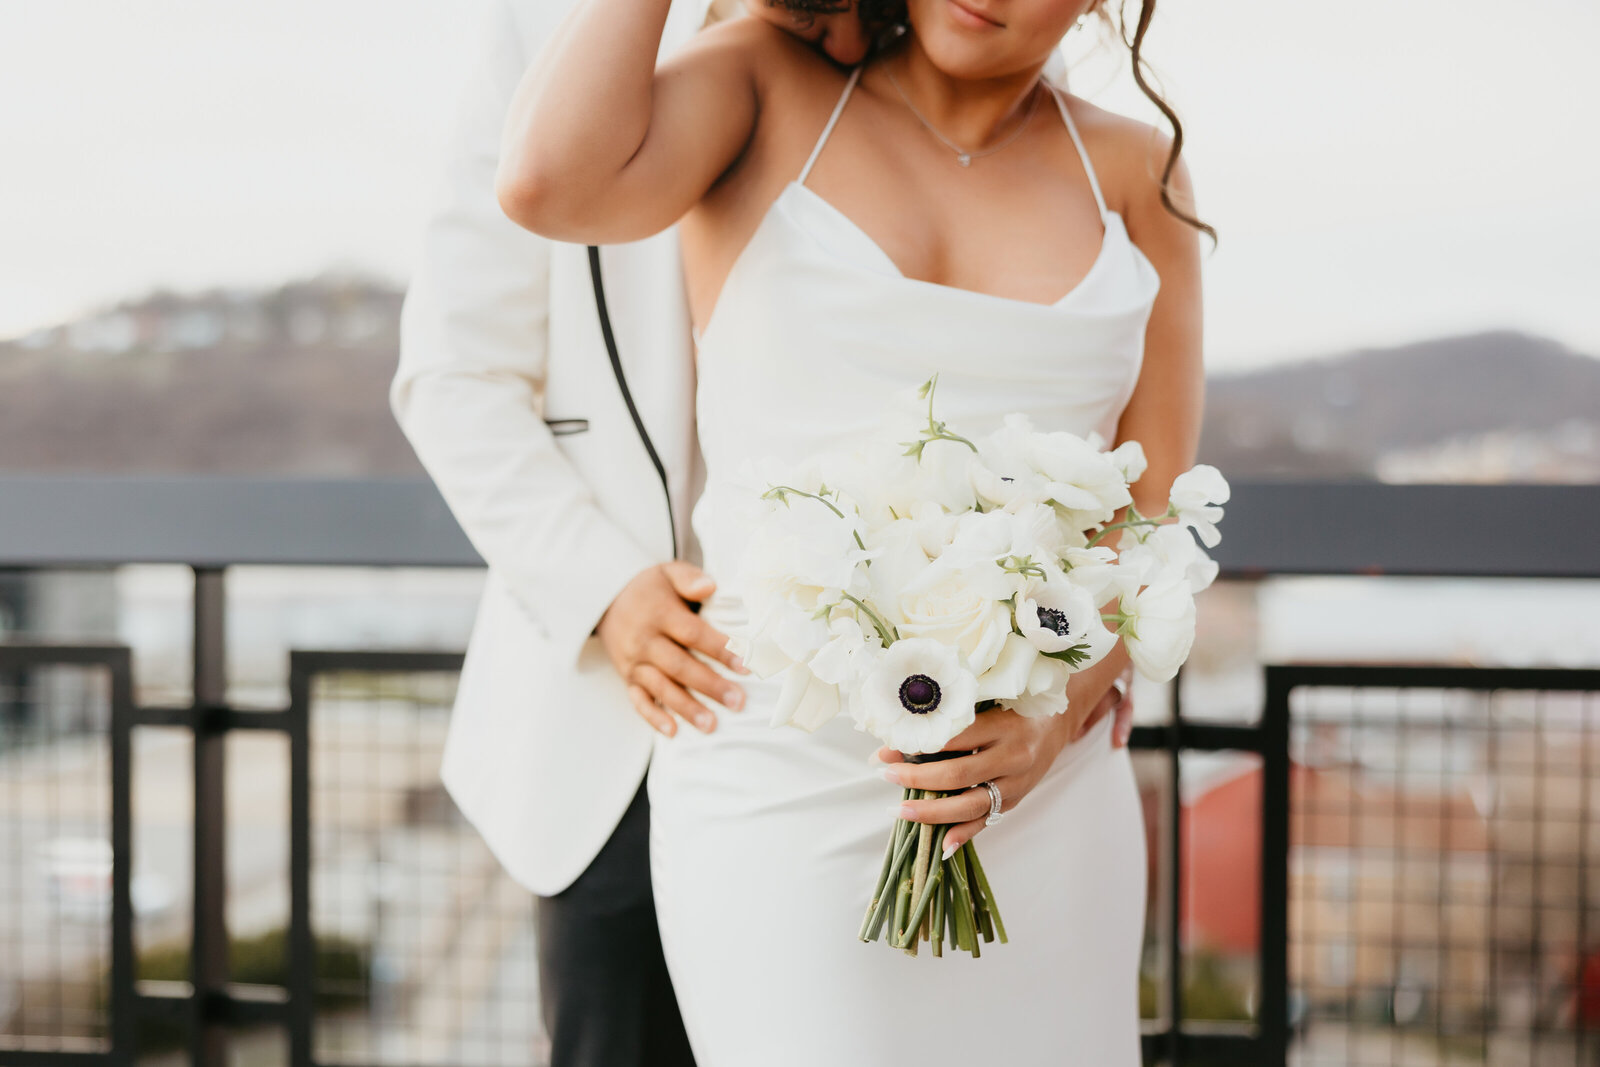 Hispanic Bride and Groom Posing on Rooftop in Pittsburgh, Pa with Wedding Bouquet